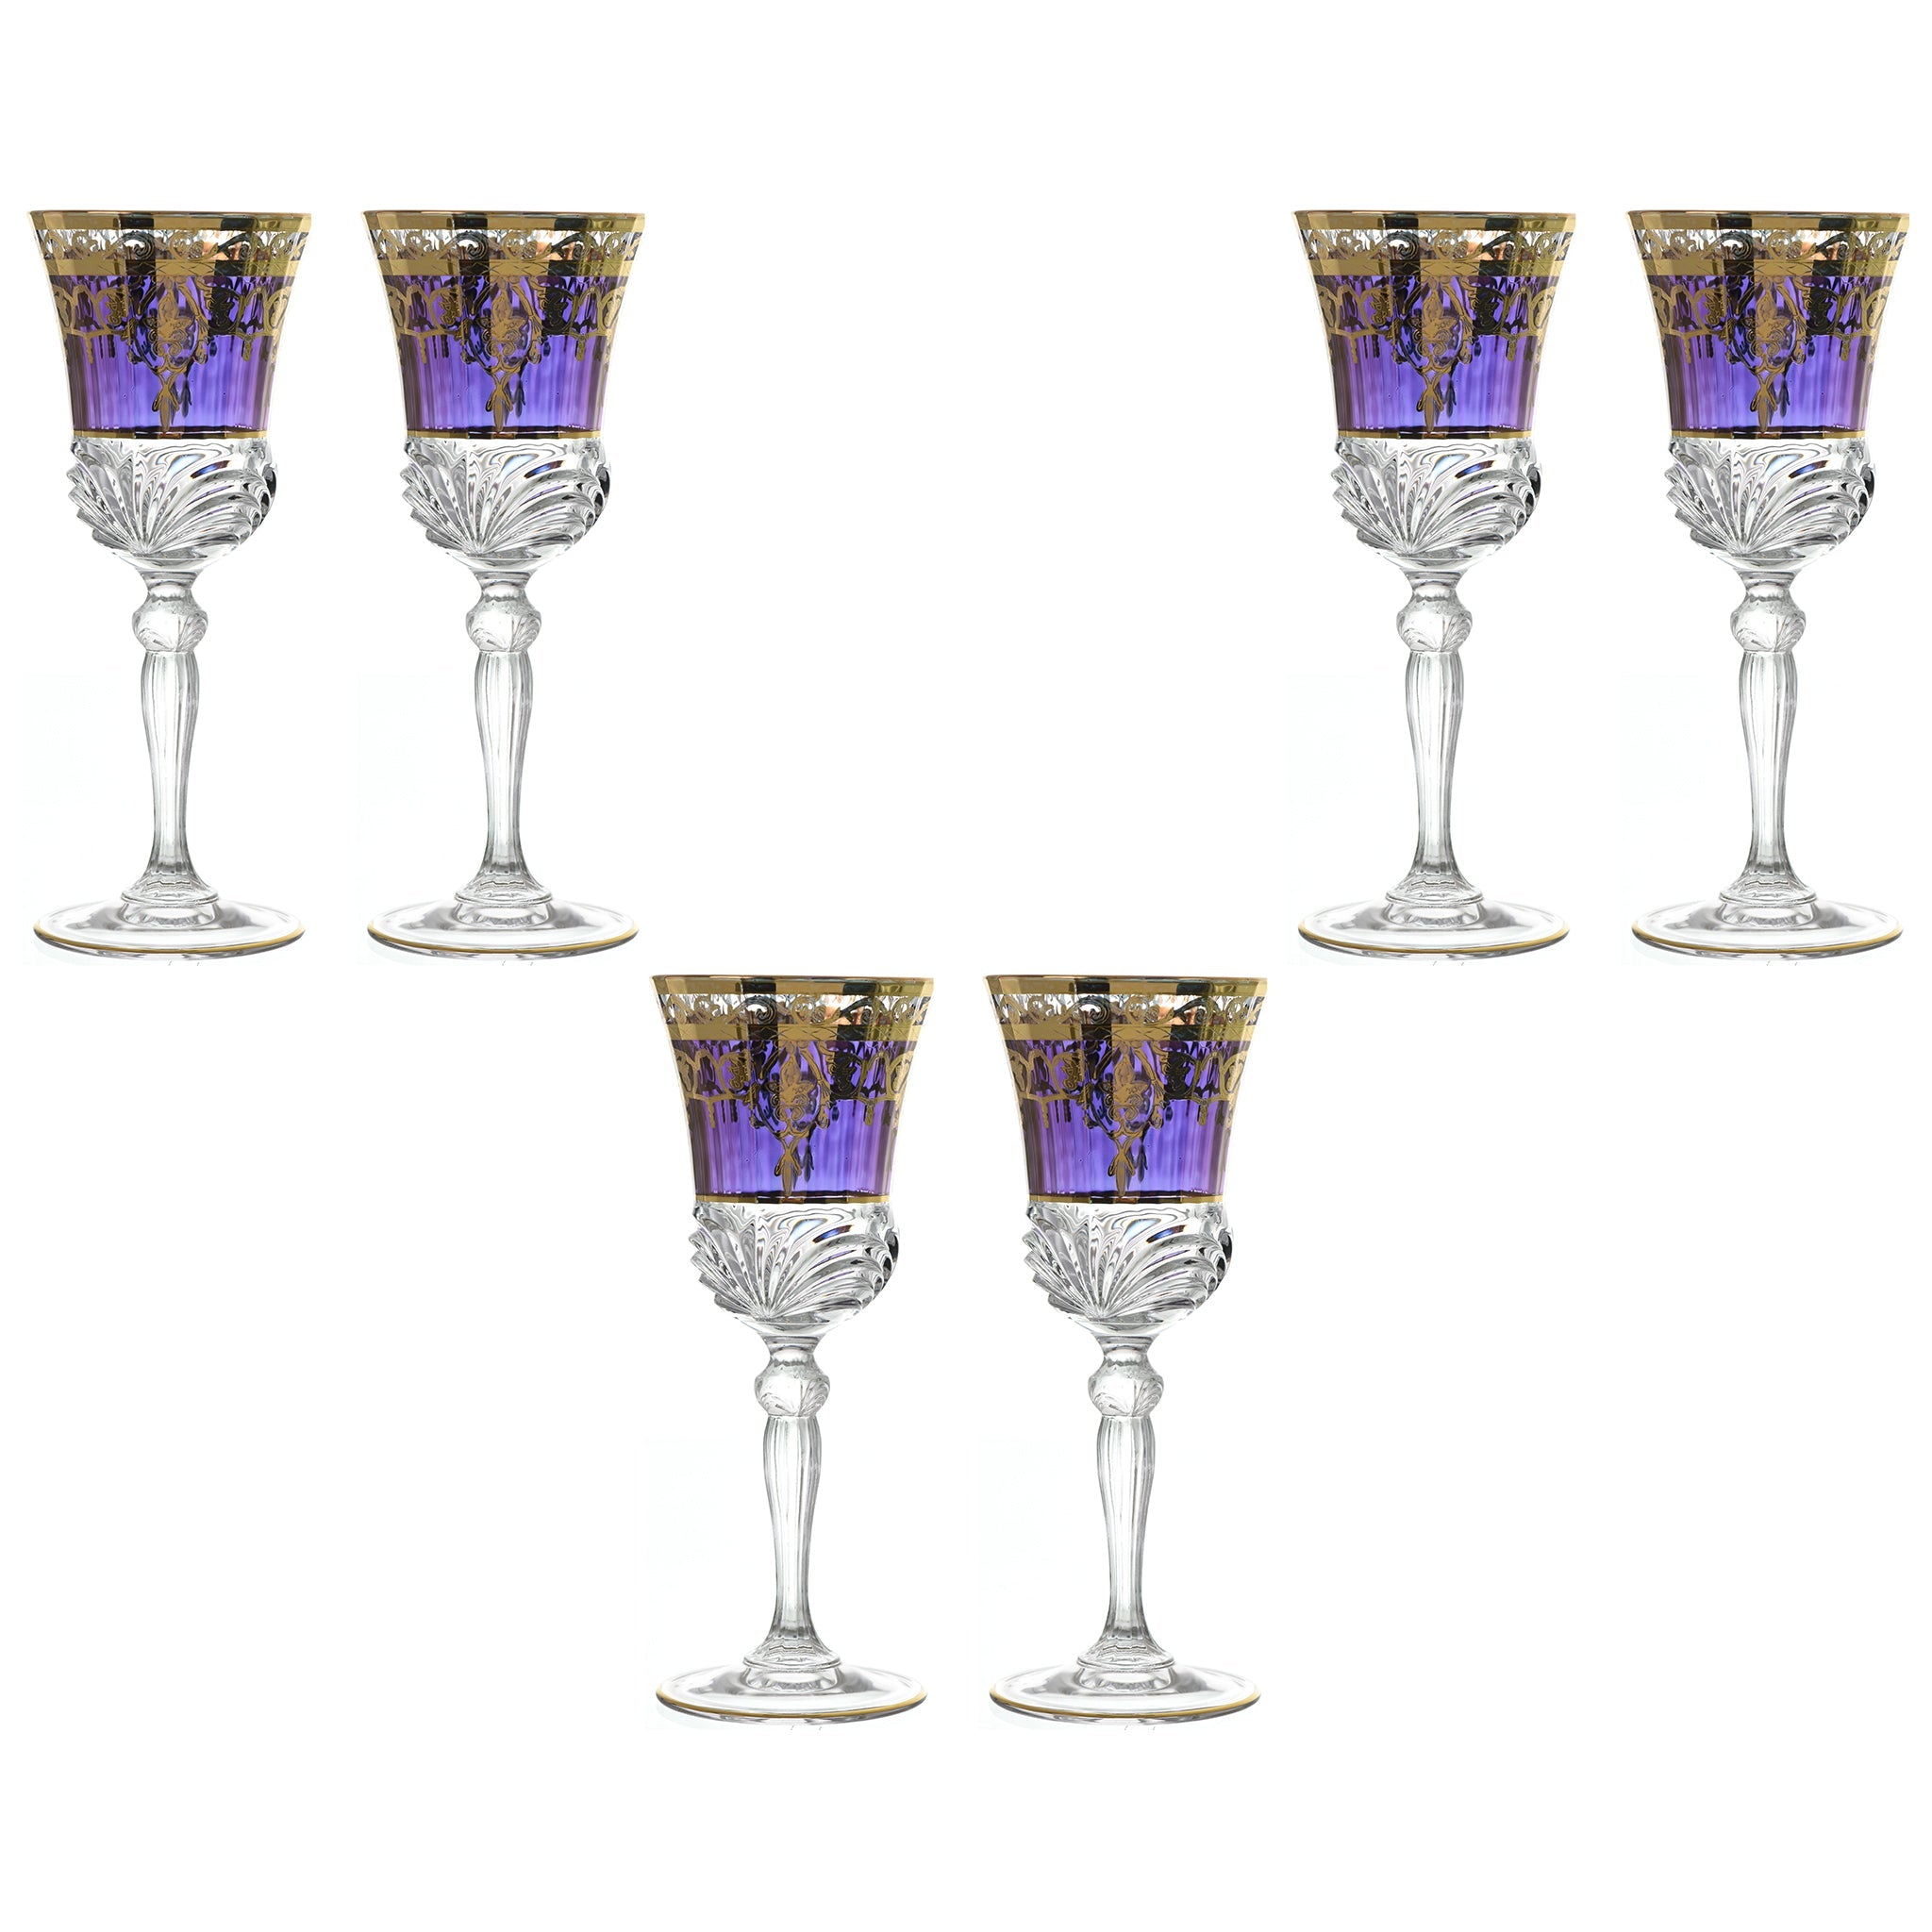 RCR Italy - Goblet Glass Set 6 Pieces Gold & Purple - 220ml - 380003076